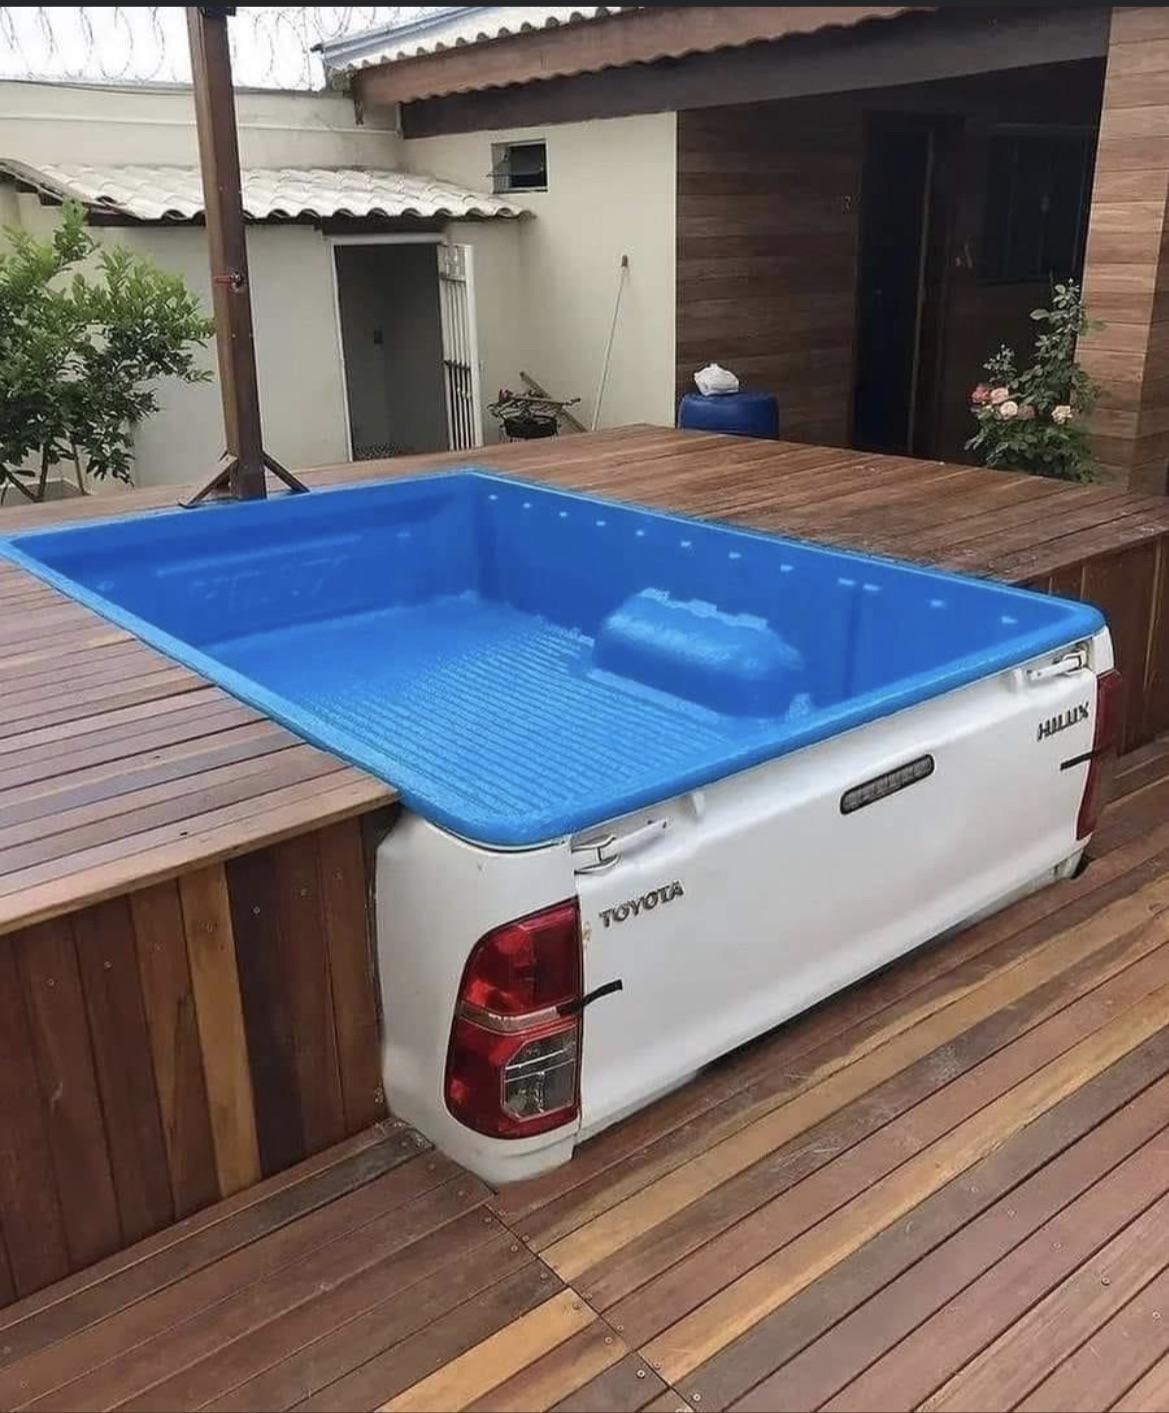 A Toyota Hilux truck bed converted into an above-ground pool with wooden decking around it